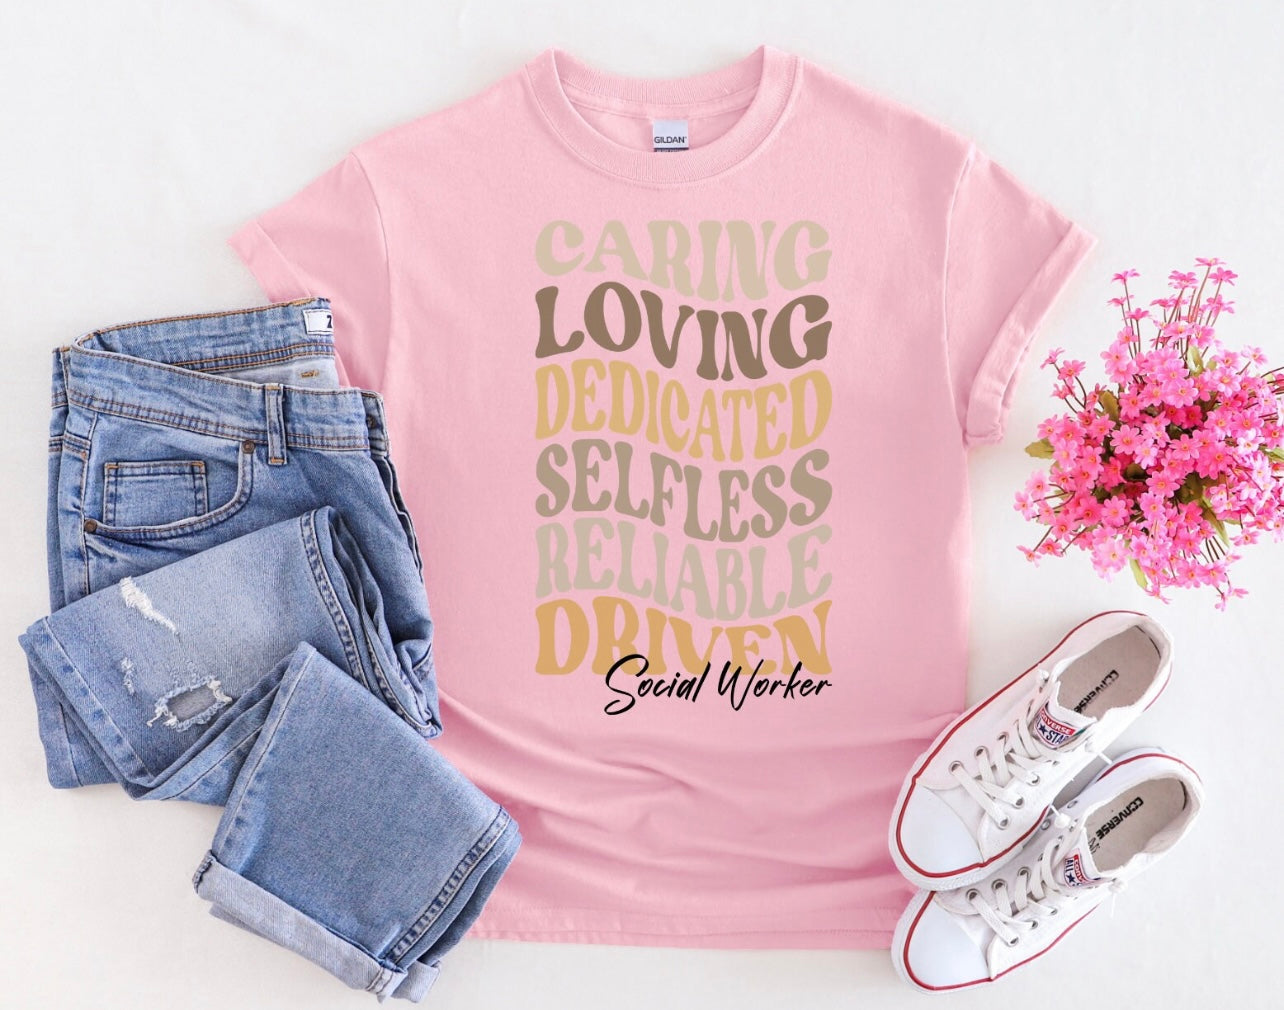 Caring Loving Dedicated Selfless Reliable Driven Social Worker, Social Work Gift, LMSW Shirt, LCSW Shirt, Advocate Shirt